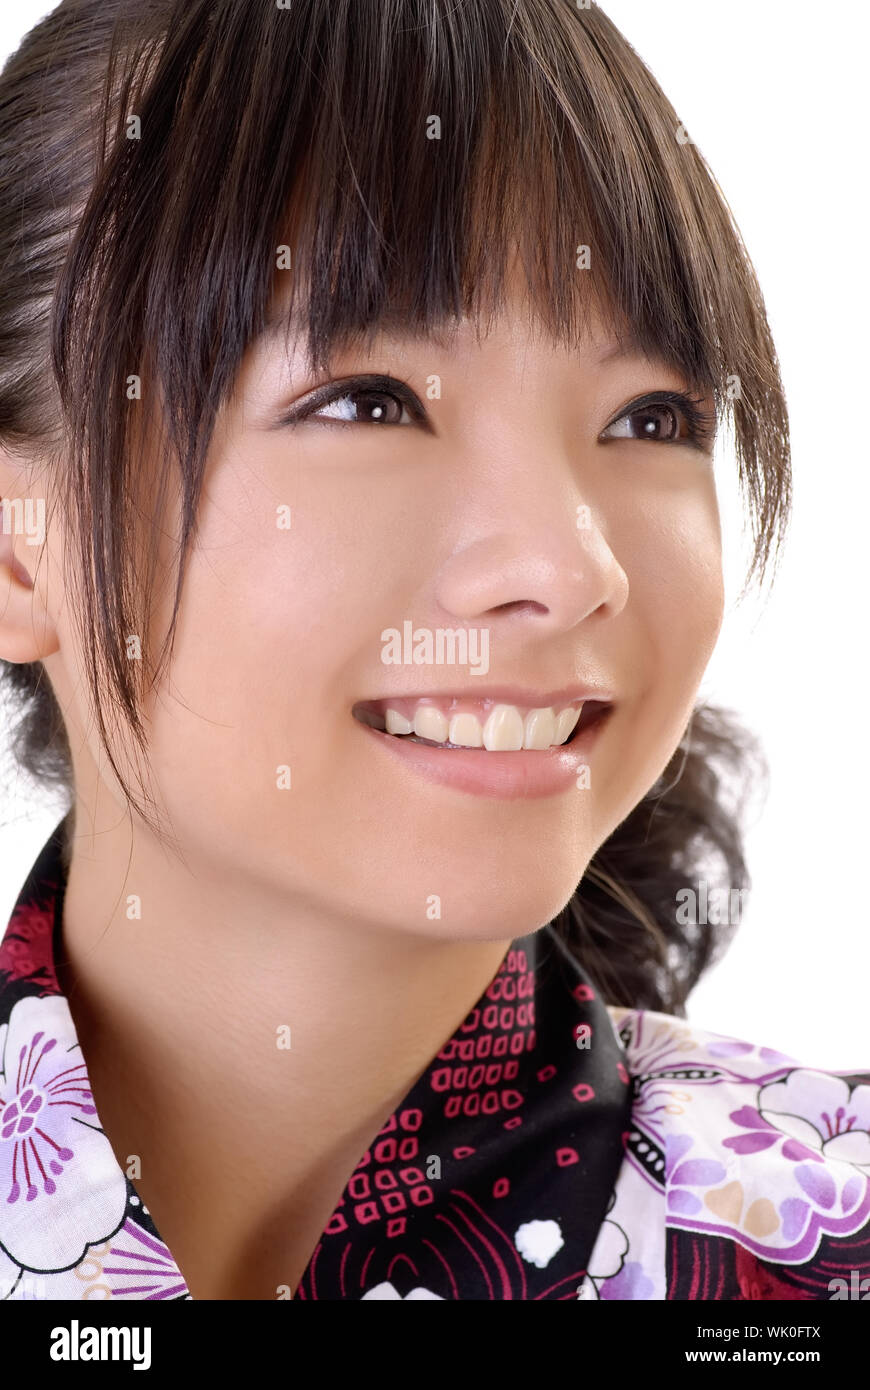 RFWK0FTX–Smiling. japanese girl face, closeup portrait of Asian woman in tr...